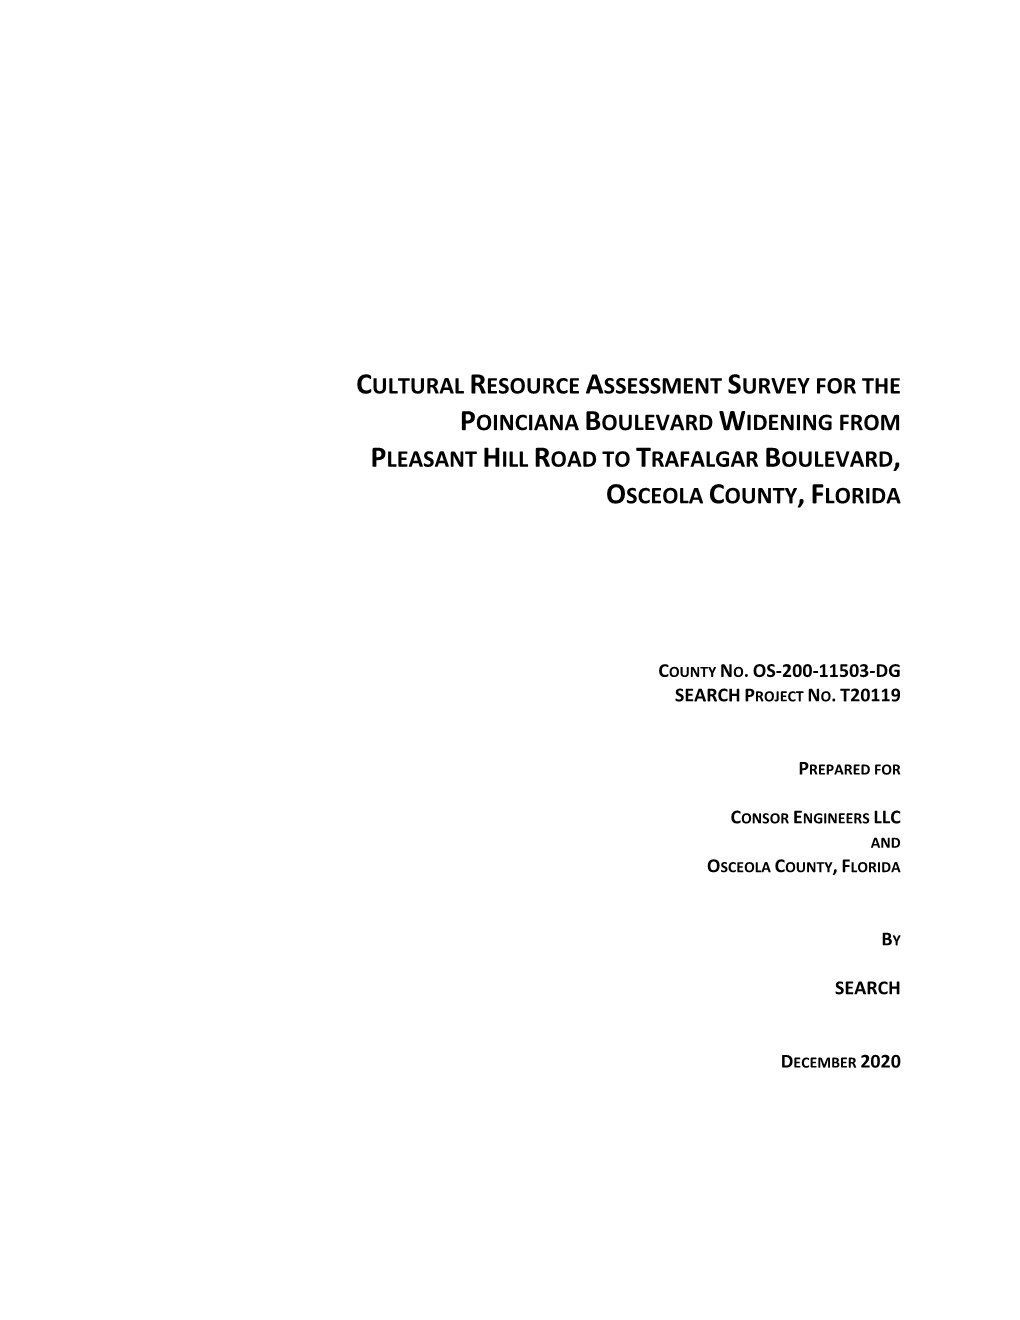 Cultural Resource Assessment Survey for the Poinciana Boulevard Widening from Pleasant Hill Road to Trafalgar Boulevard, Osceola County, Florida